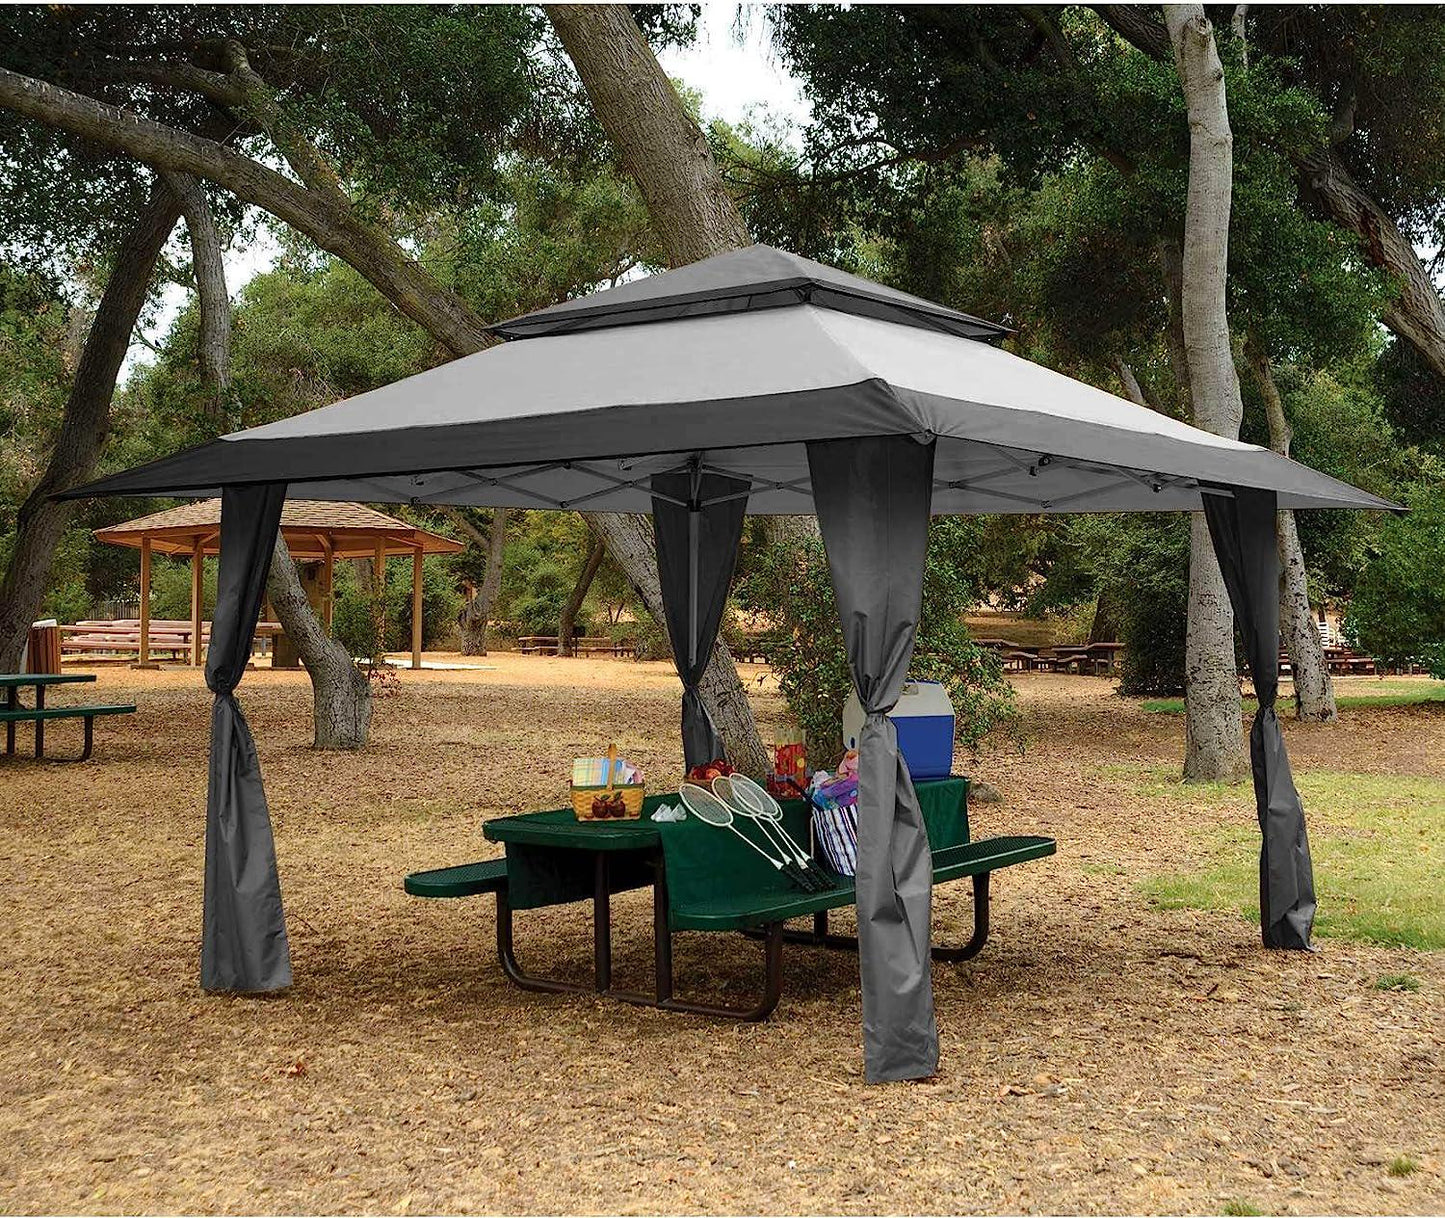 Z-Shade 13 x 13 Foot Instant Gazebo Outdoor Canopy Patio Shelter Tent with Reliable Stakes, Steel Frame, and Rolling Bag, Gray